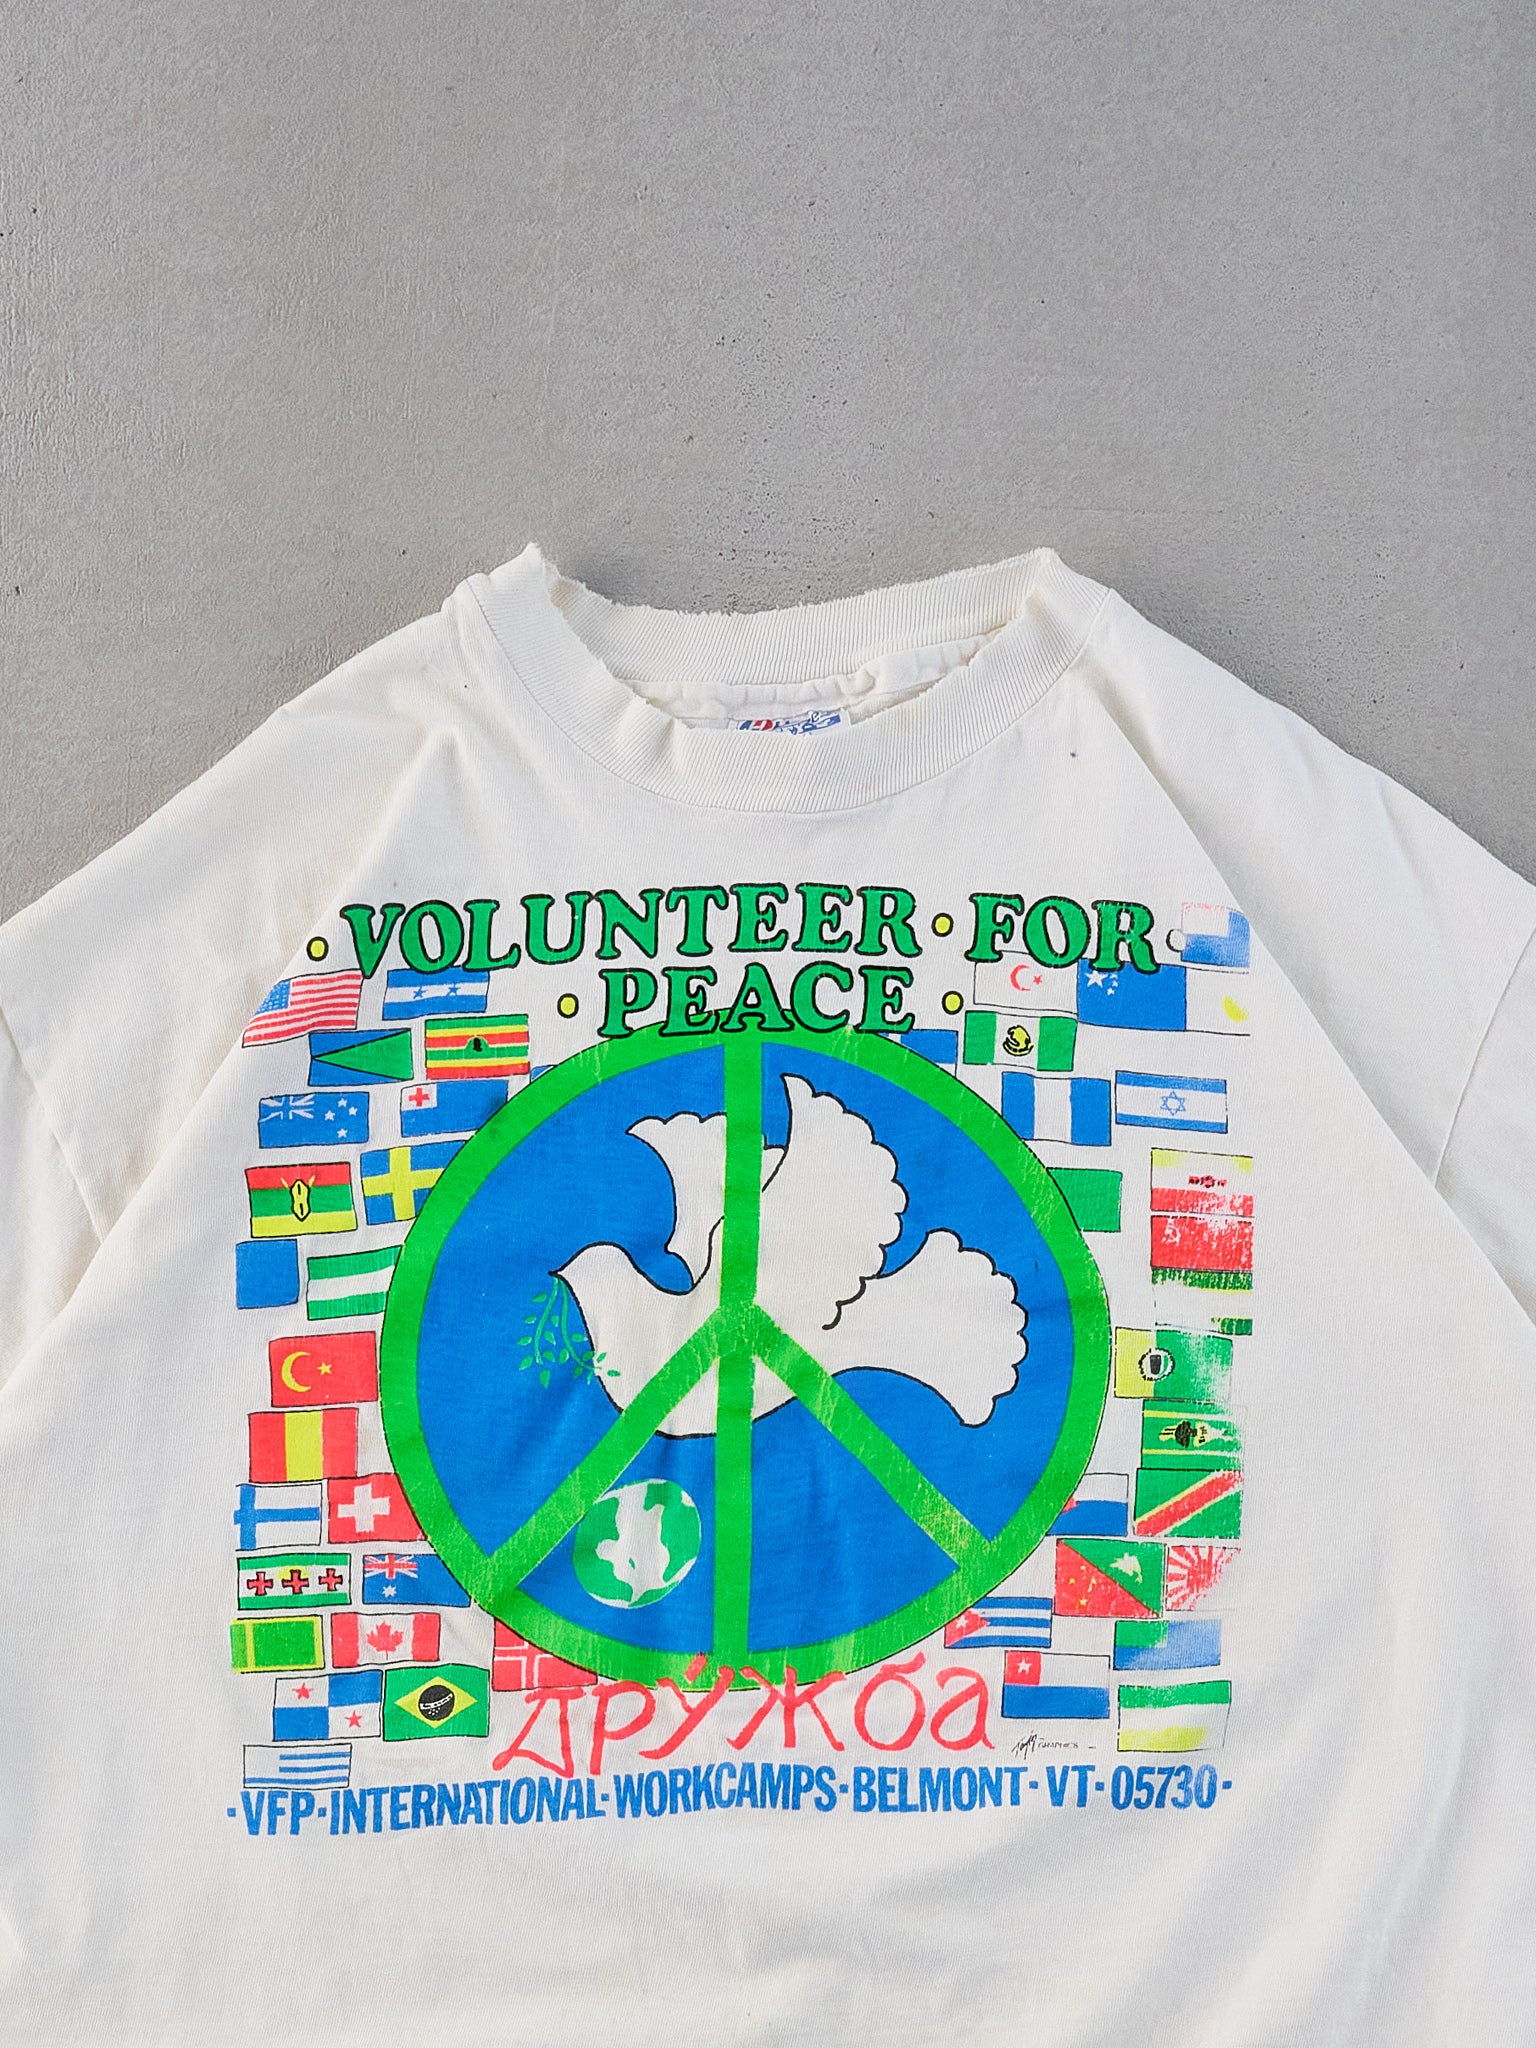 Vintage 90s White Single Stitched Volunteer for Peace Graphic Tee (M)